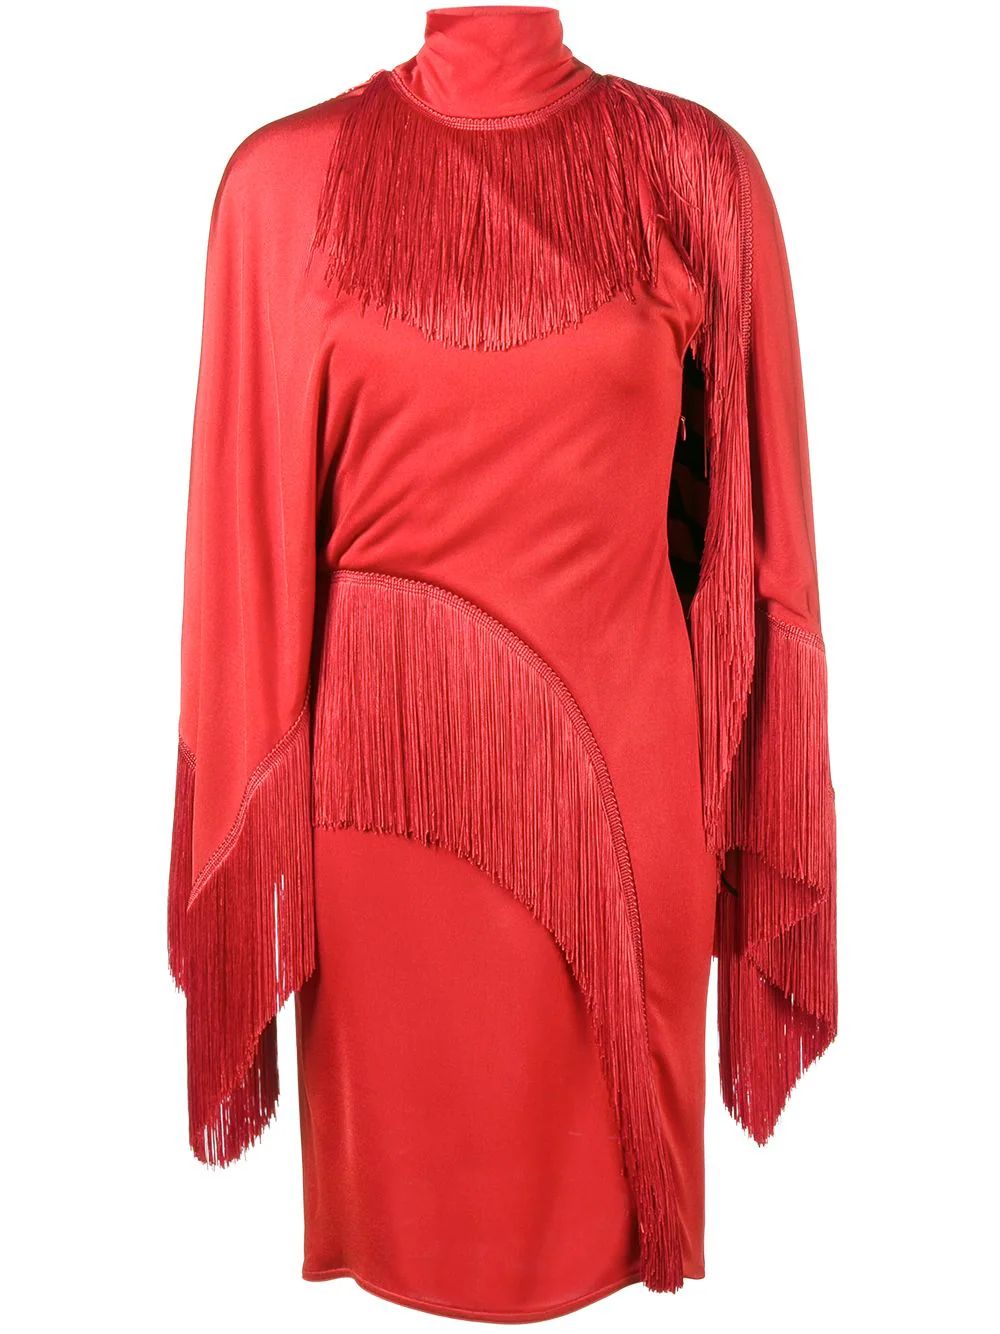 Givenchy Dress with Fringing - Red | FarFetch Global